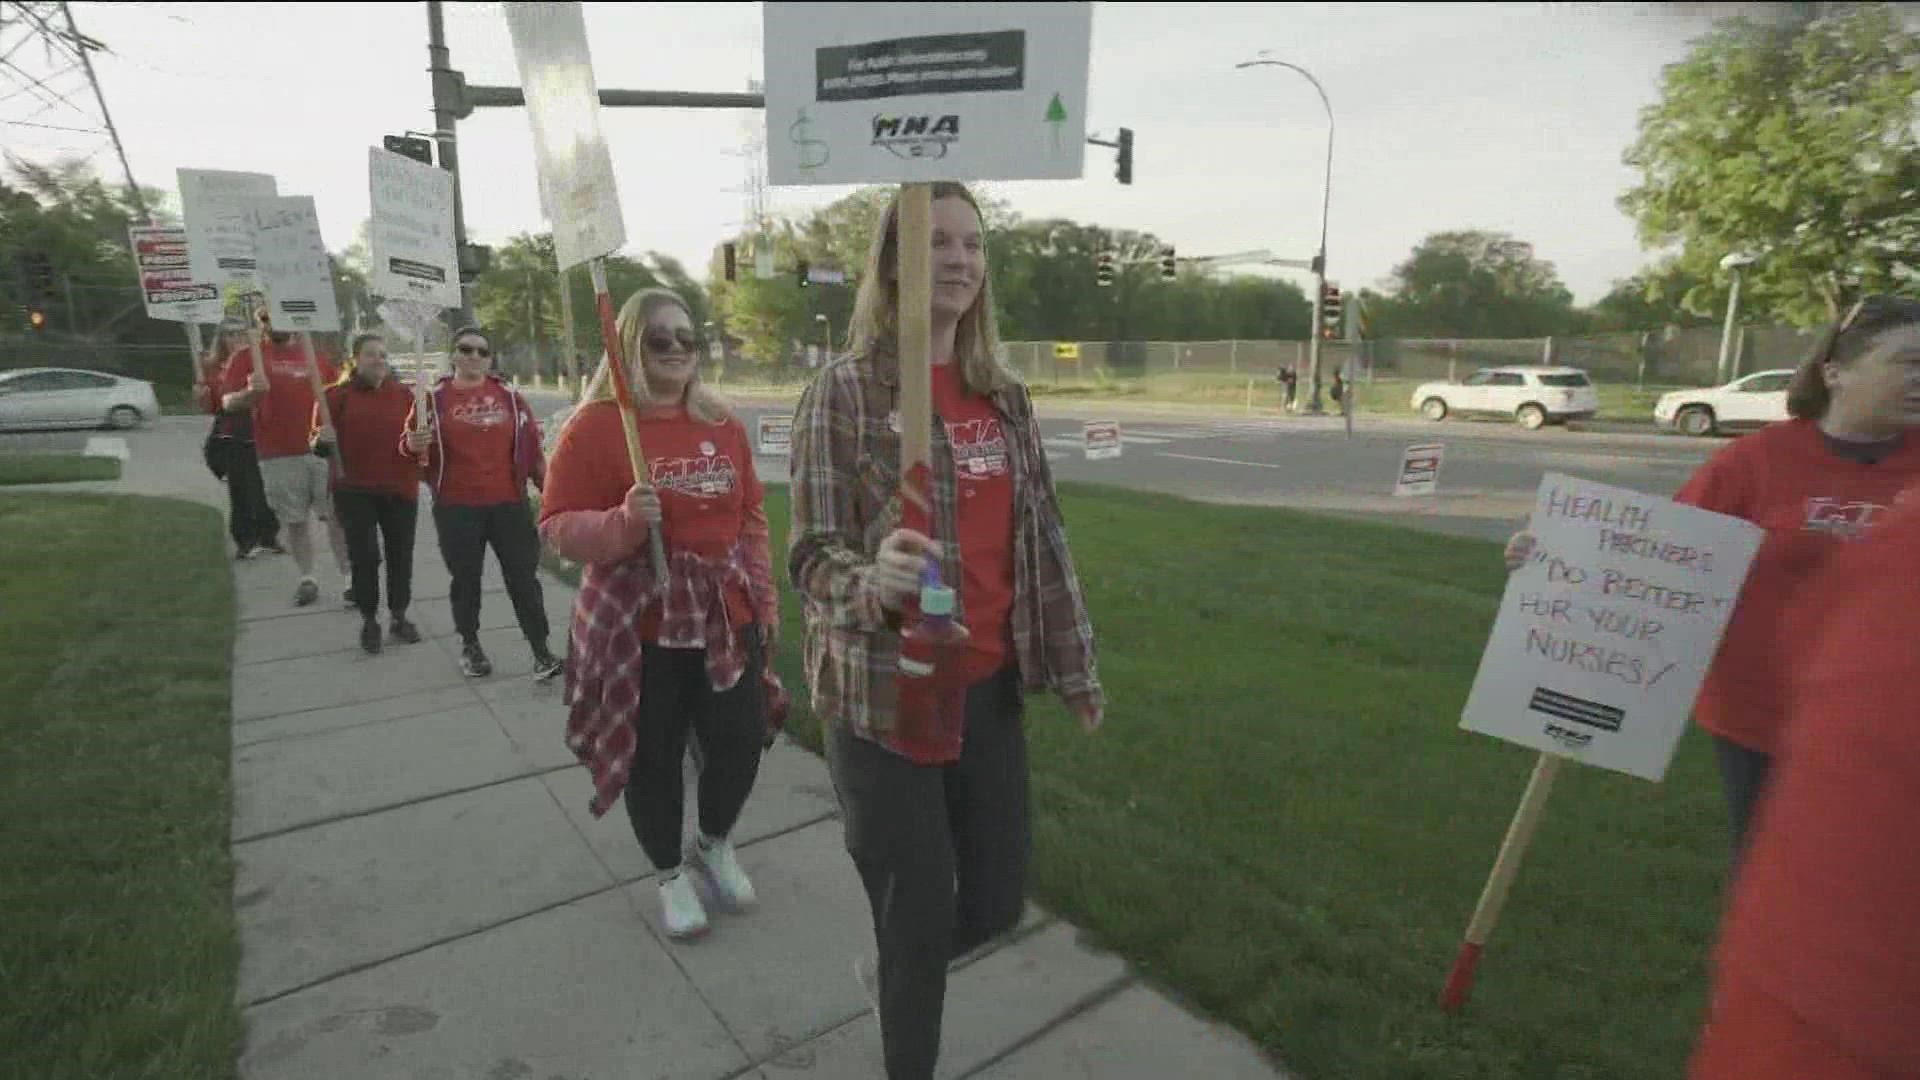 Around 15,000 nurses are hitting the picket line asking for better contracts and better patient care.